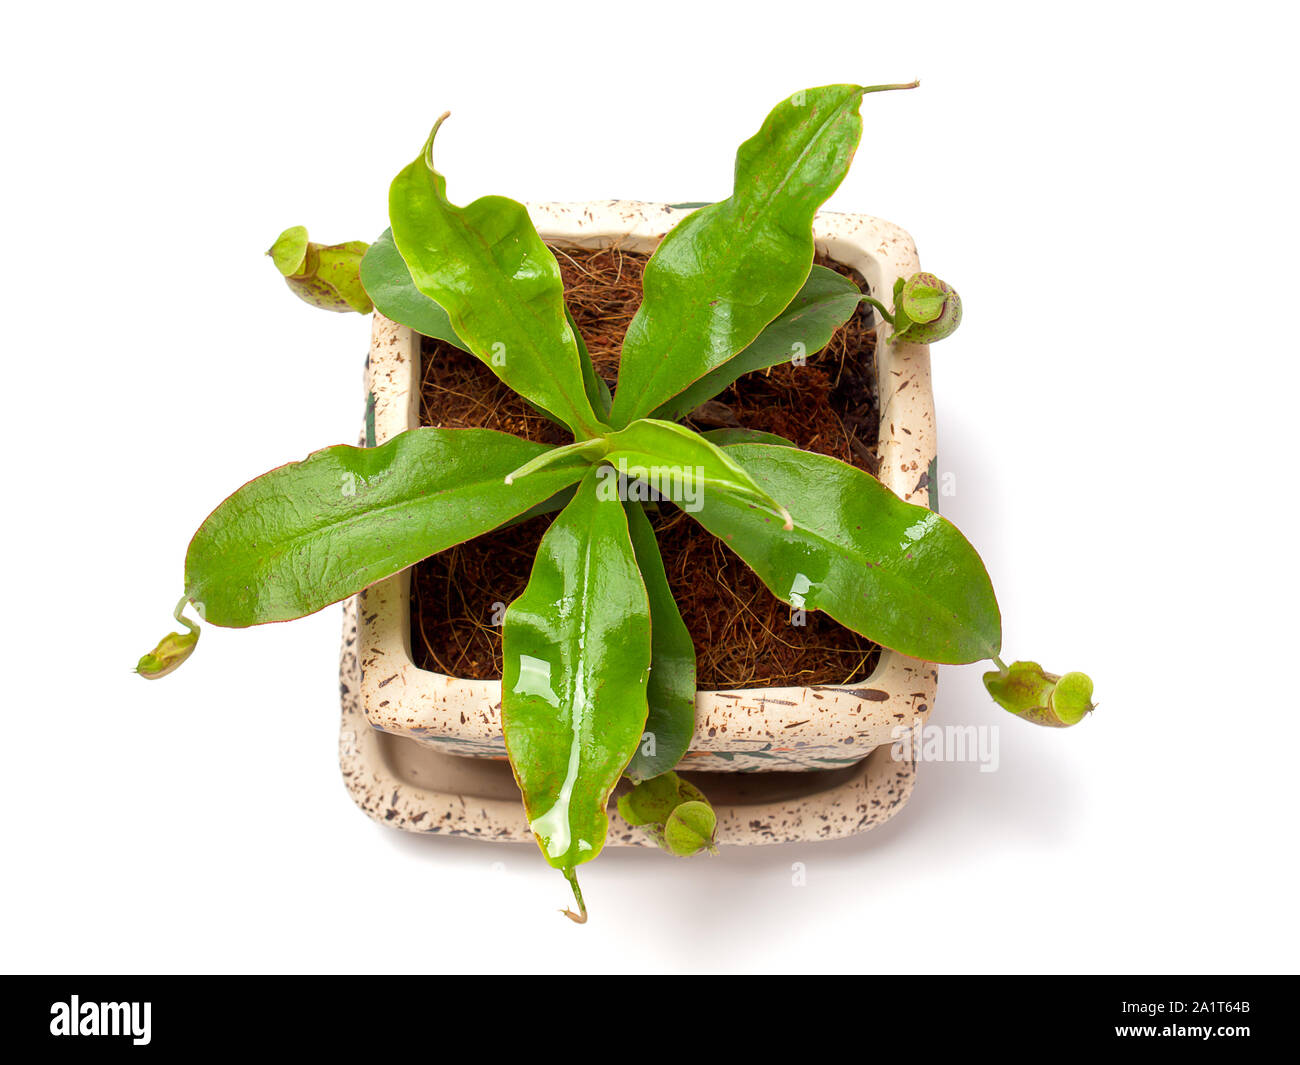 tropical pitcher plants , a type of carnivorous plant. Stock Photo